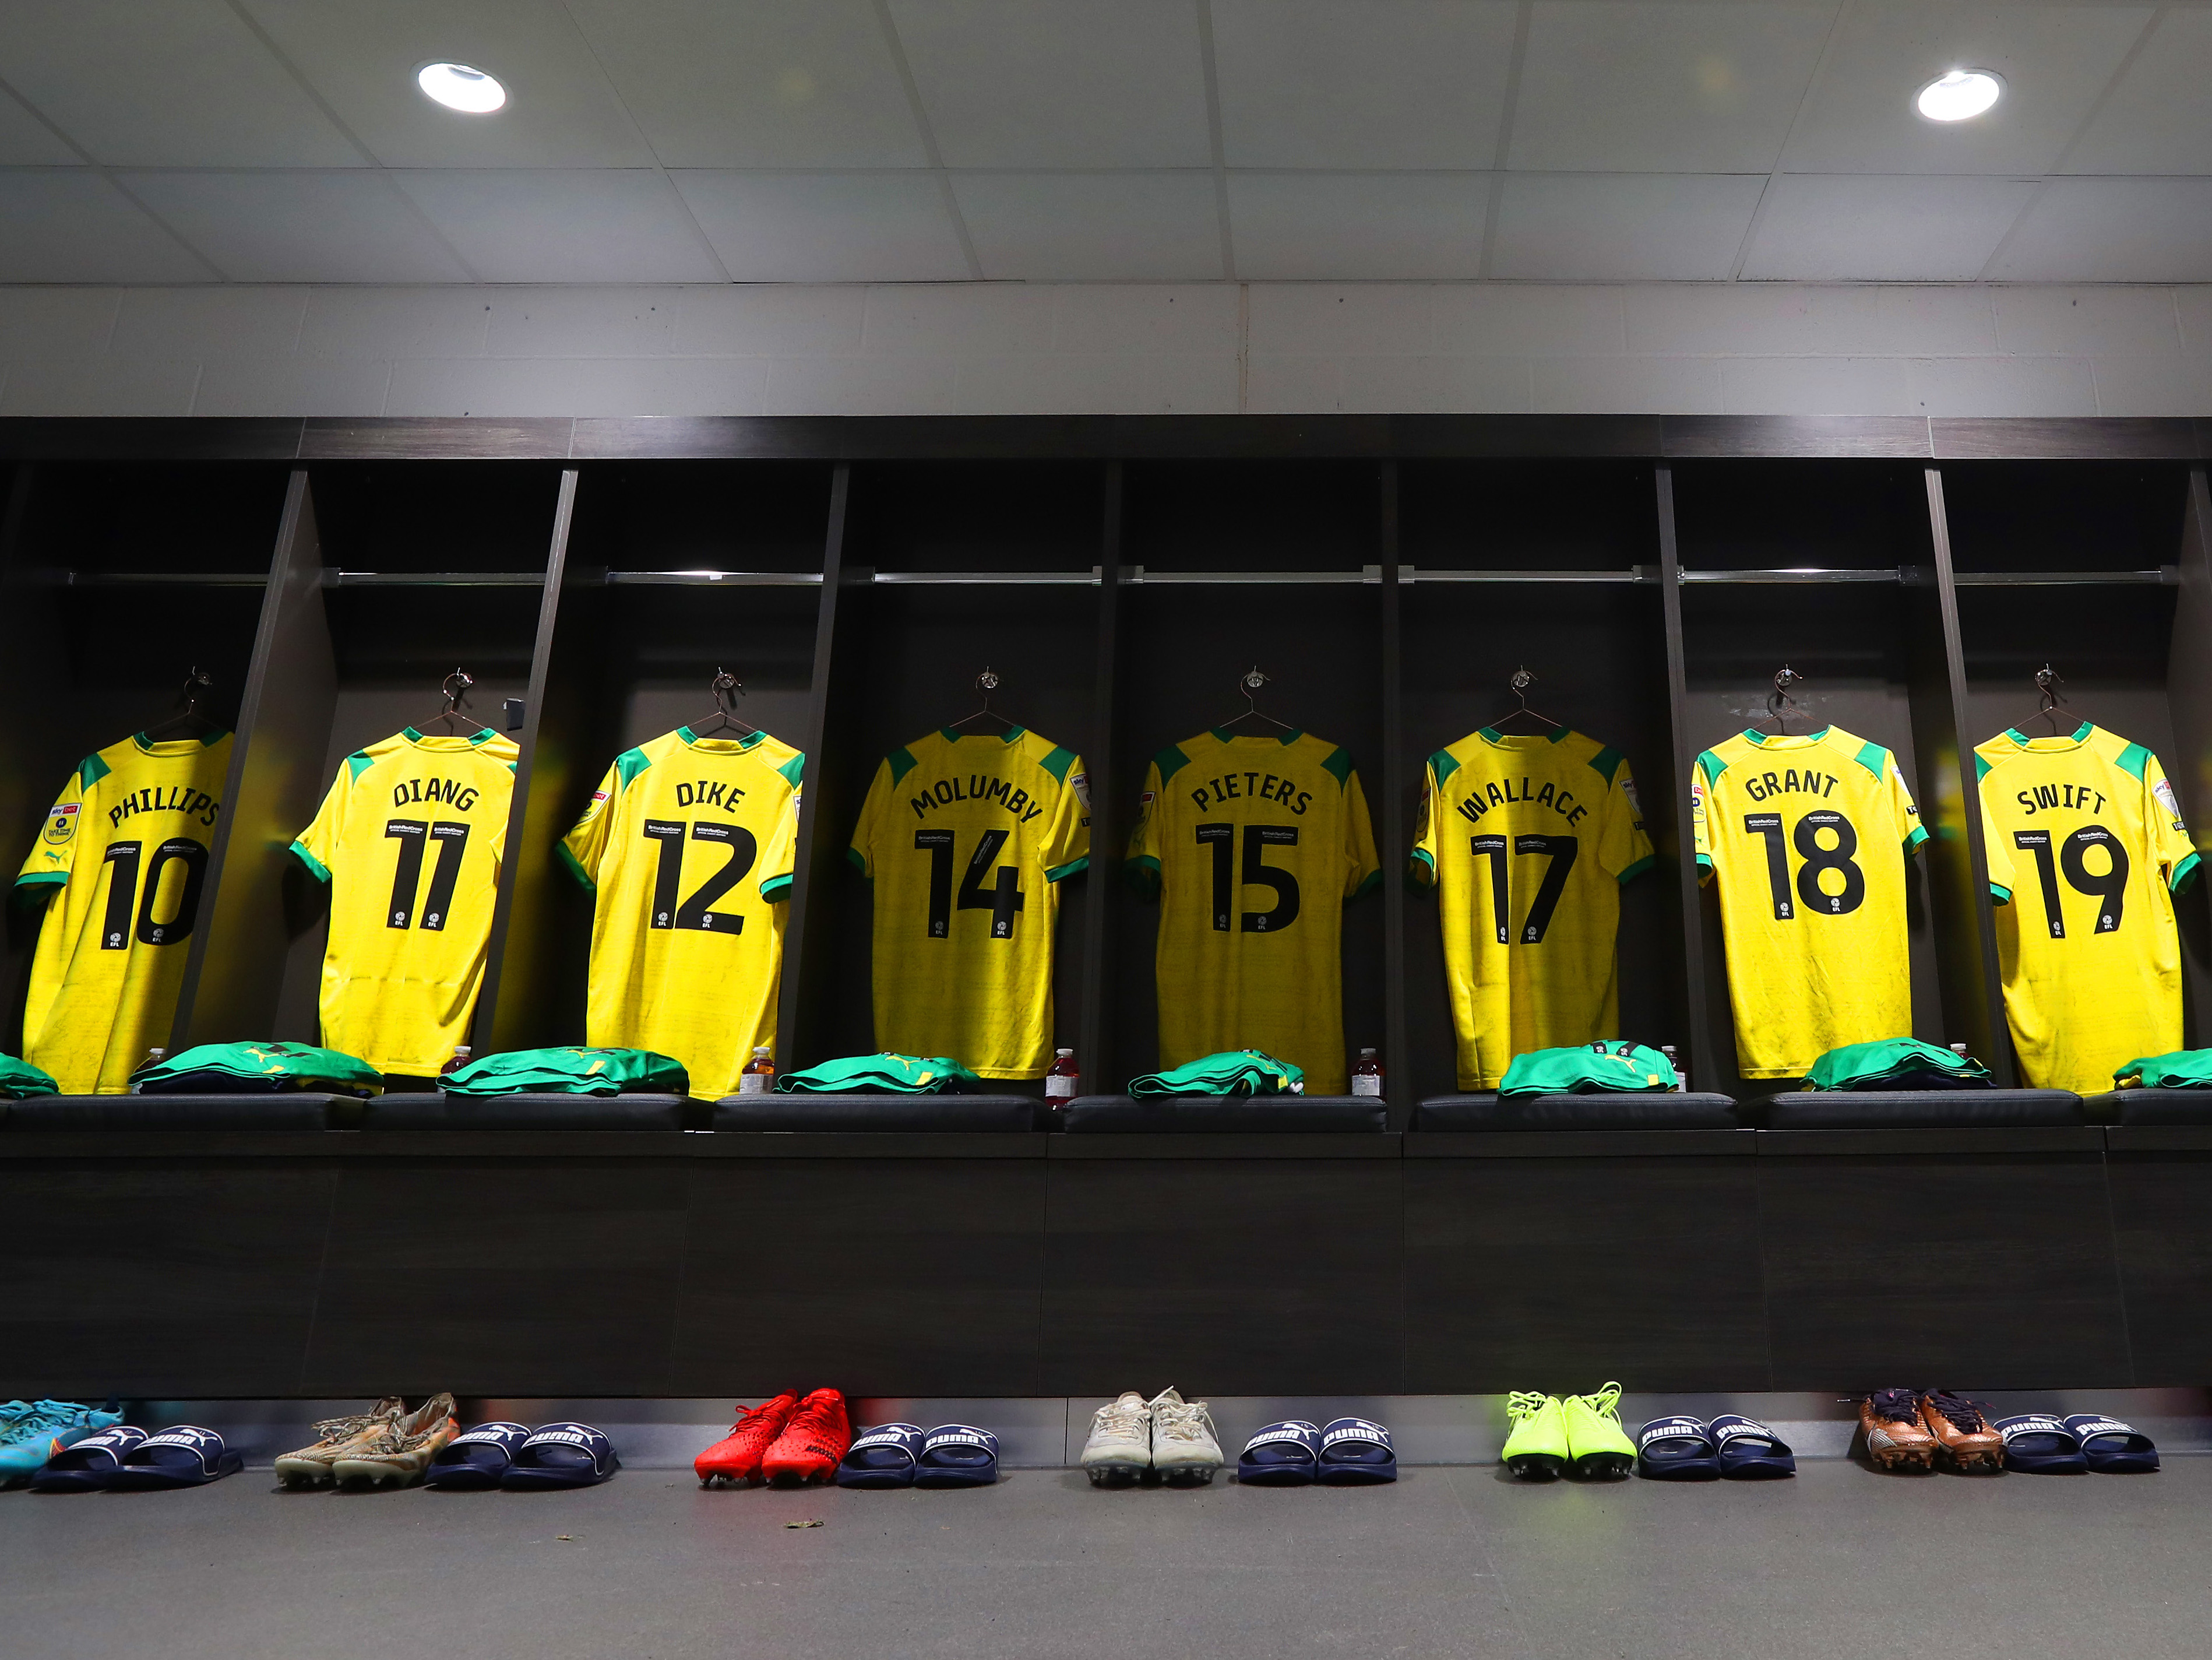 WBA away shirts hanging up in the dressing room